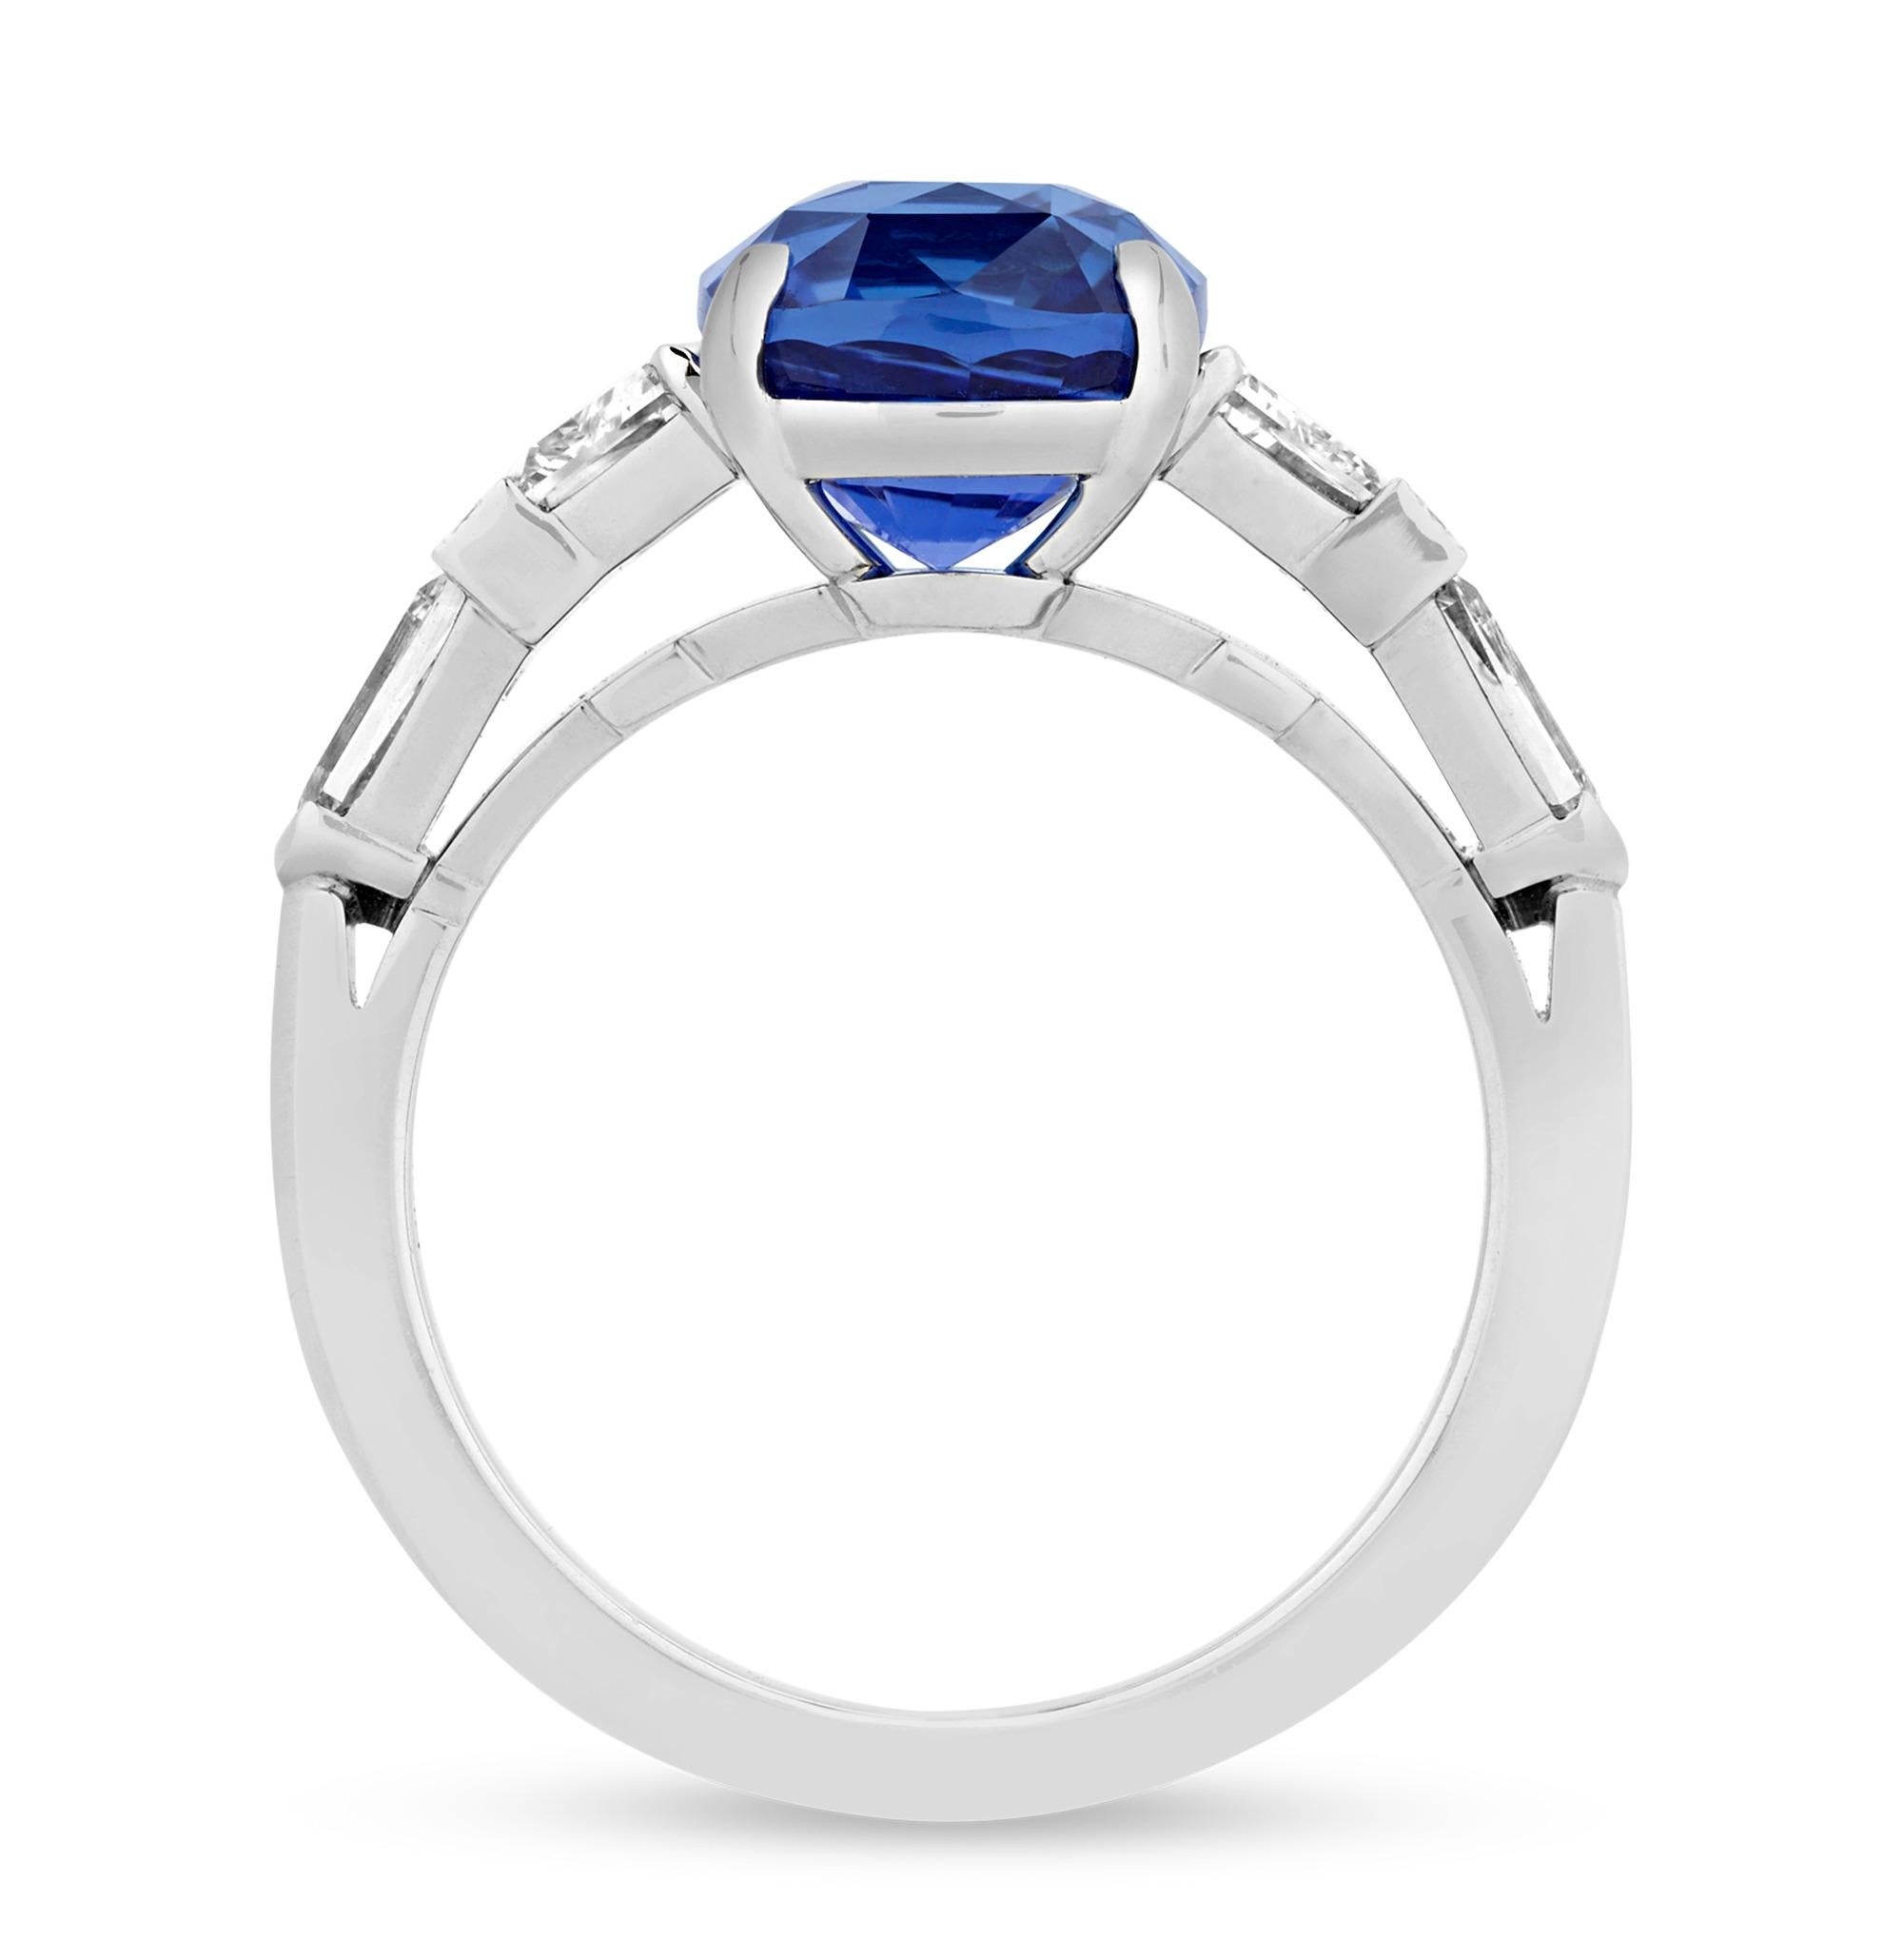 This vivid sapphire ring, designed by Raymond Yard, is a testament to the designer's unparalleled craftsmanship and innovative design ethos. The ring features an exquisite 4.60-carat cushion cut sapphire, encased in a meticulously crafted platinum